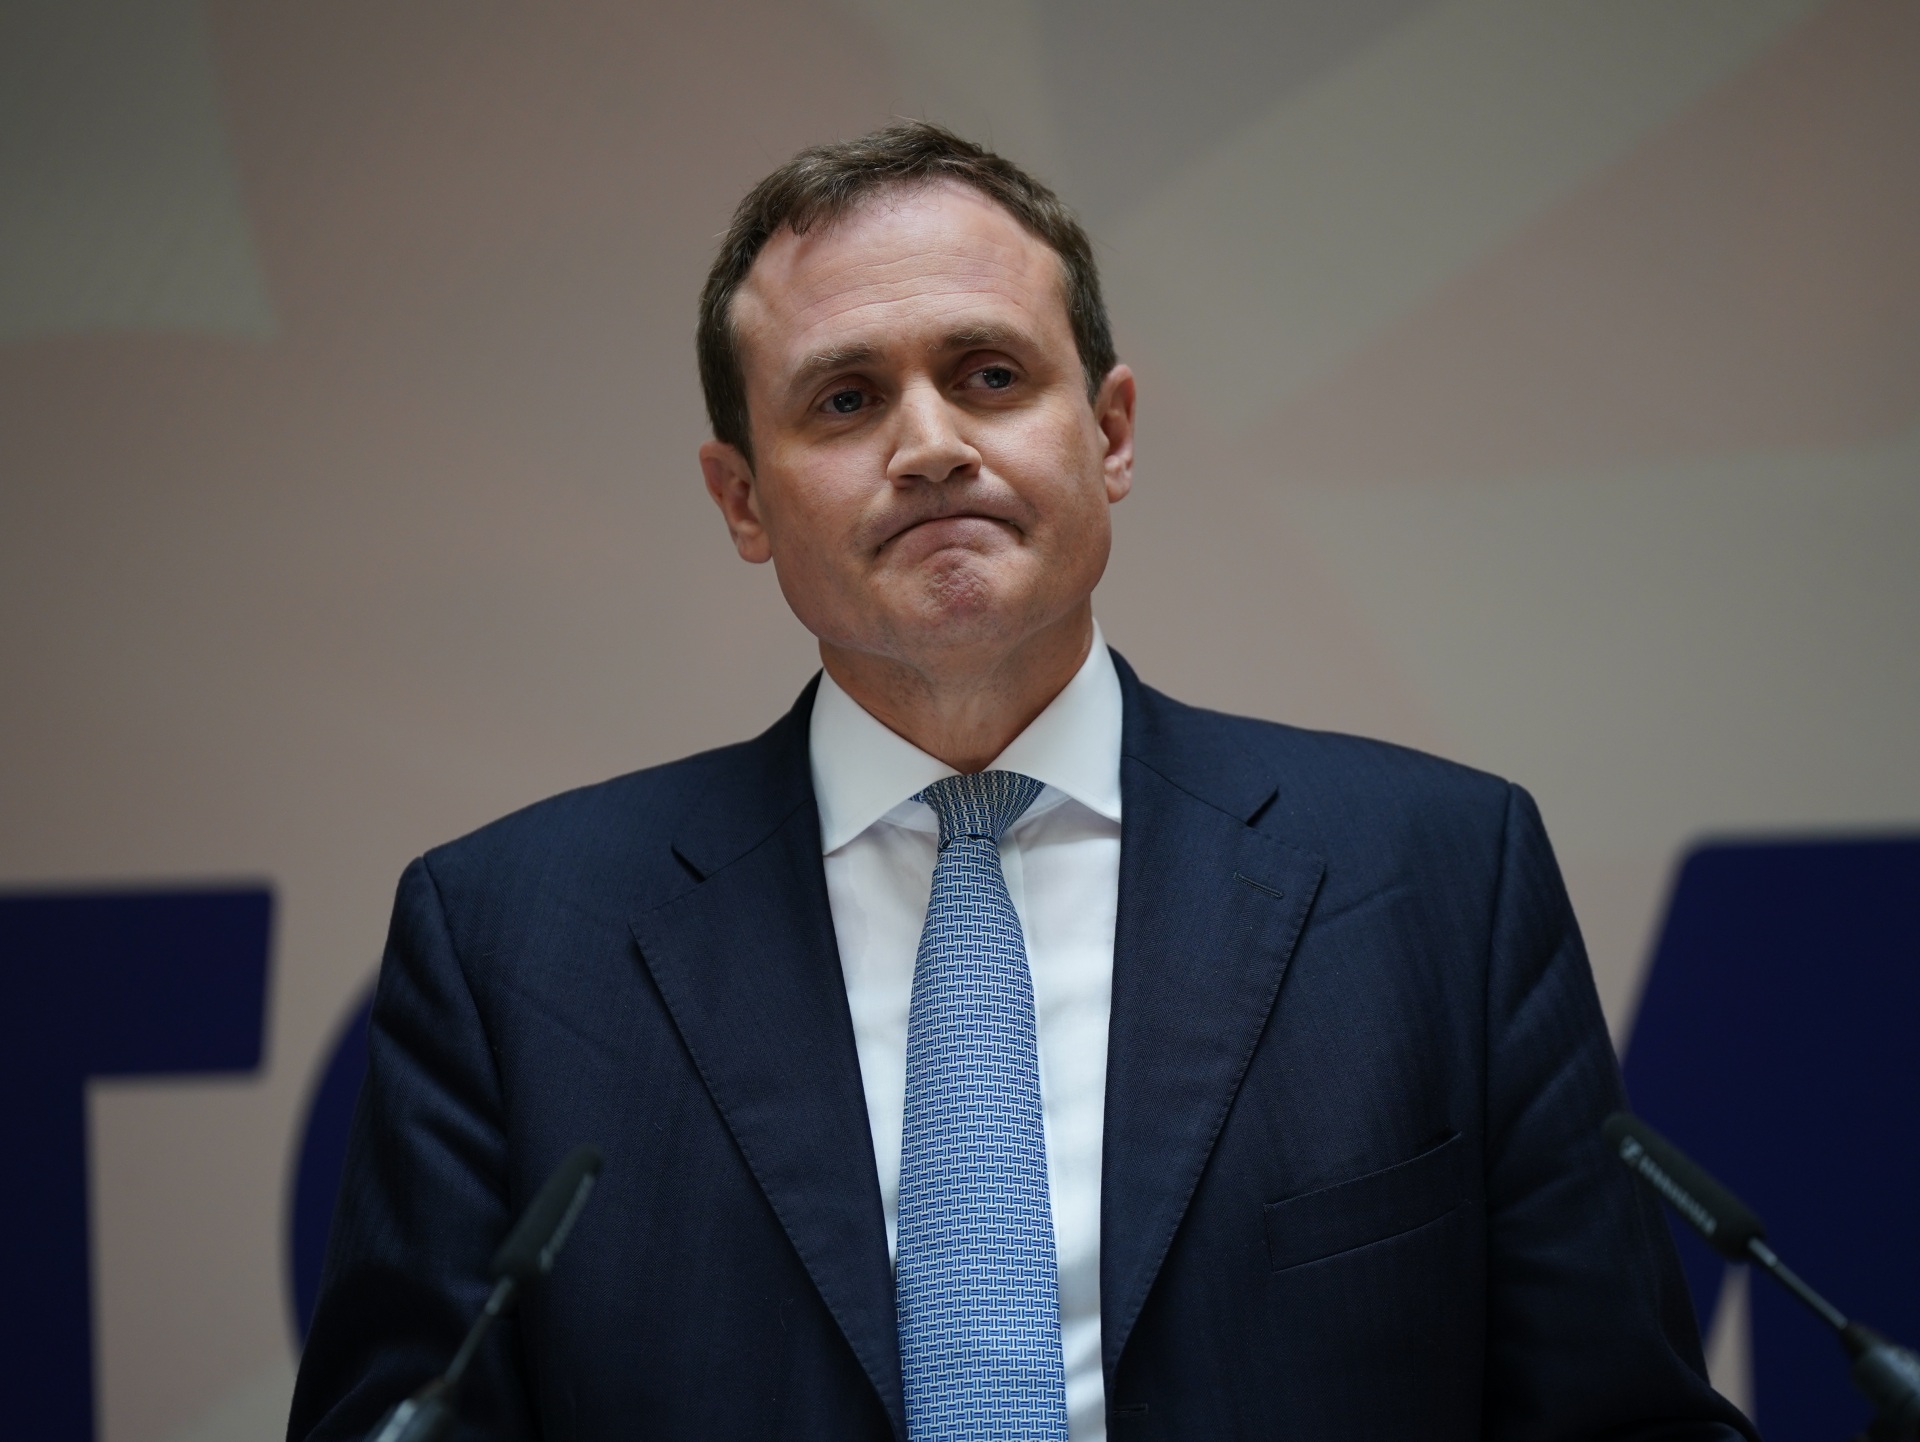 Tom Tugendhat speaking at the launch of his campaign to be Conservative Party leader and Prime Minister, at 4 Millbank, London. Picture date: Tuesday July 12, 2022. (Photo by Yui Mok/PA Images via Getty Images)